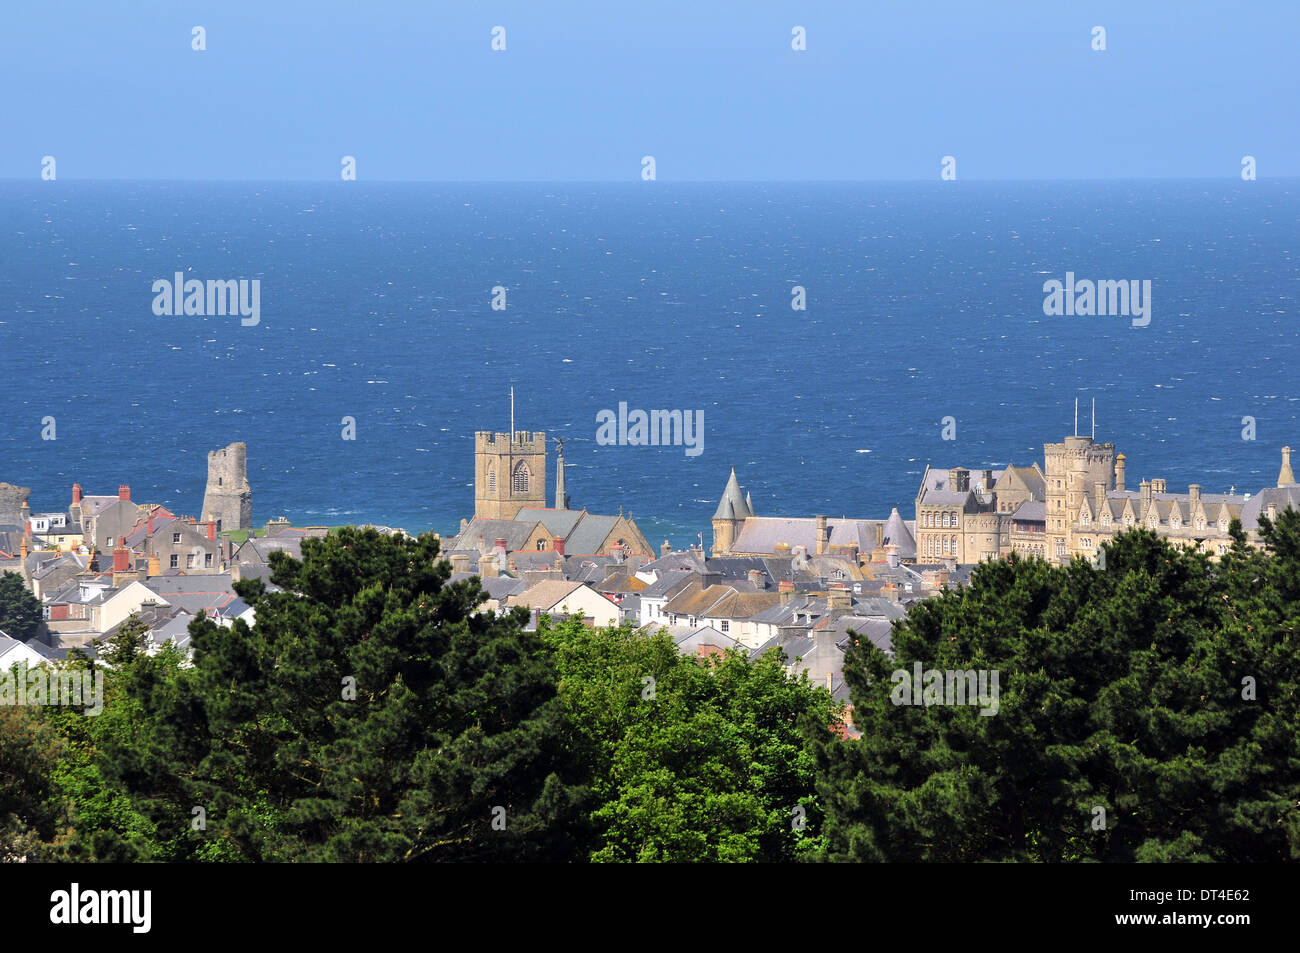 Aberystwyth Castle, St Michaels Church and the Old College of Aberystwyth University against a blue sea on a sunny day in May. Stock Photo